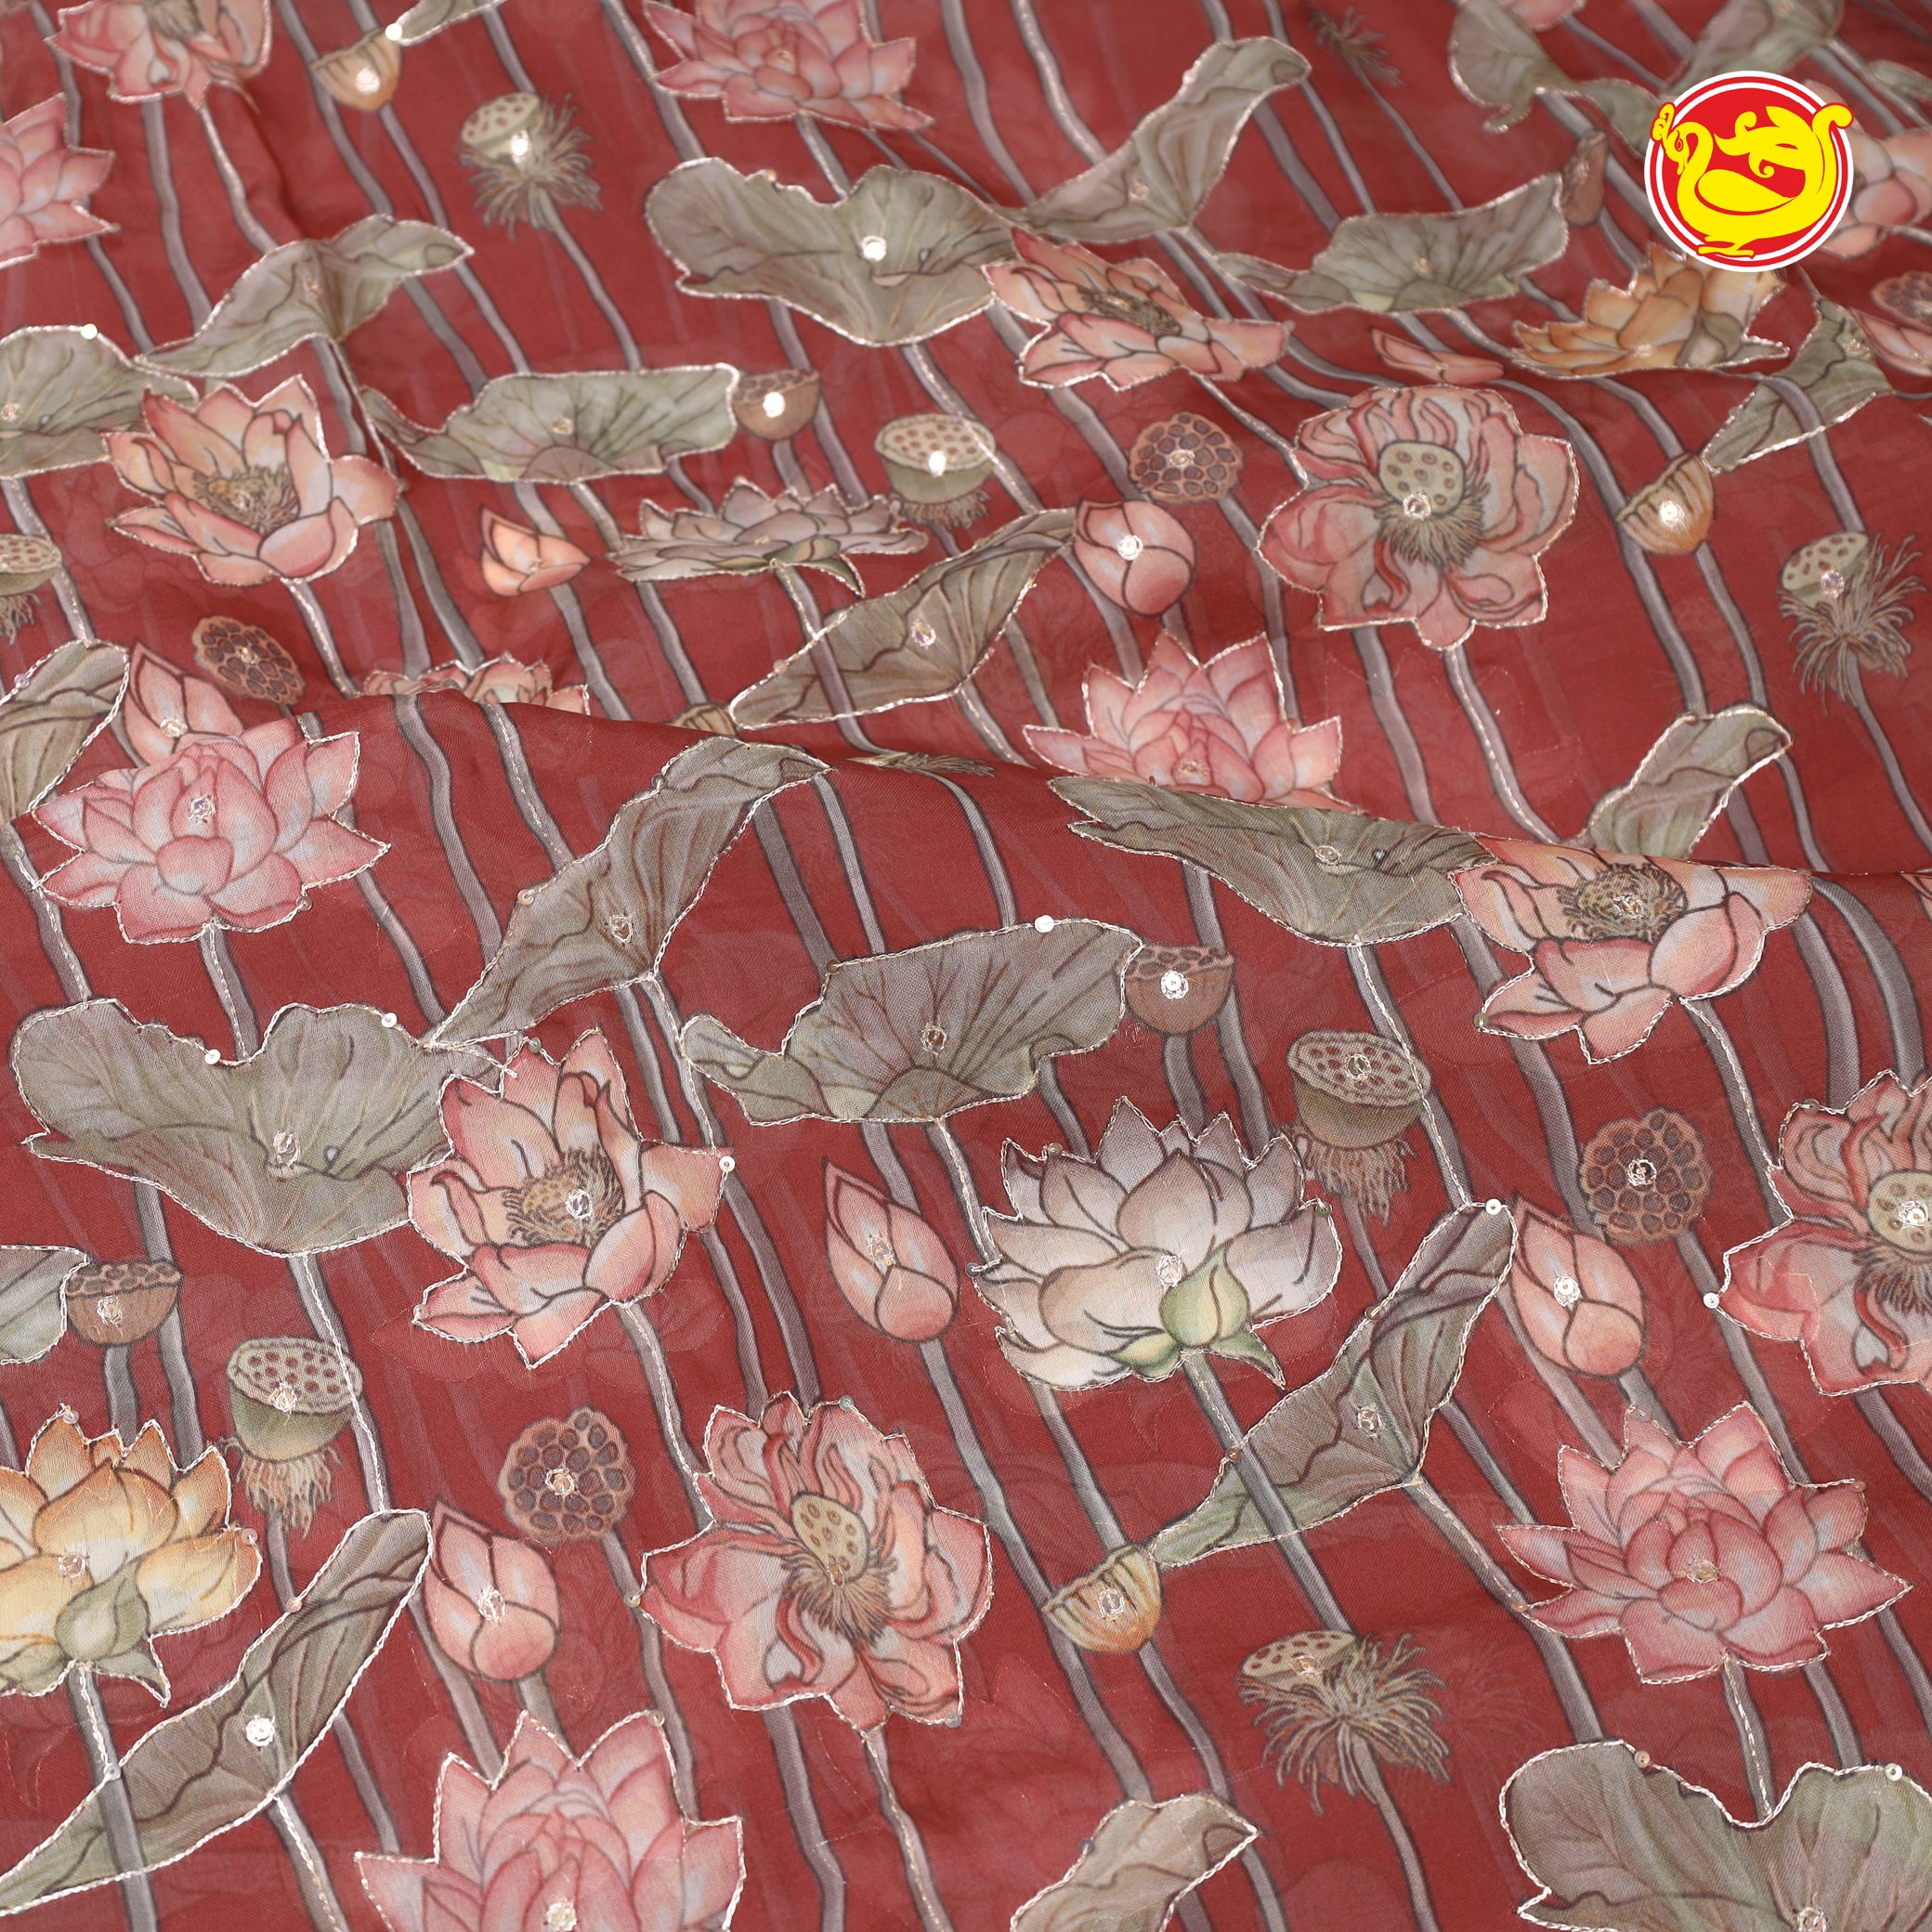 Dark beetroot pink pure organza saree with hand embroidery over digital prints